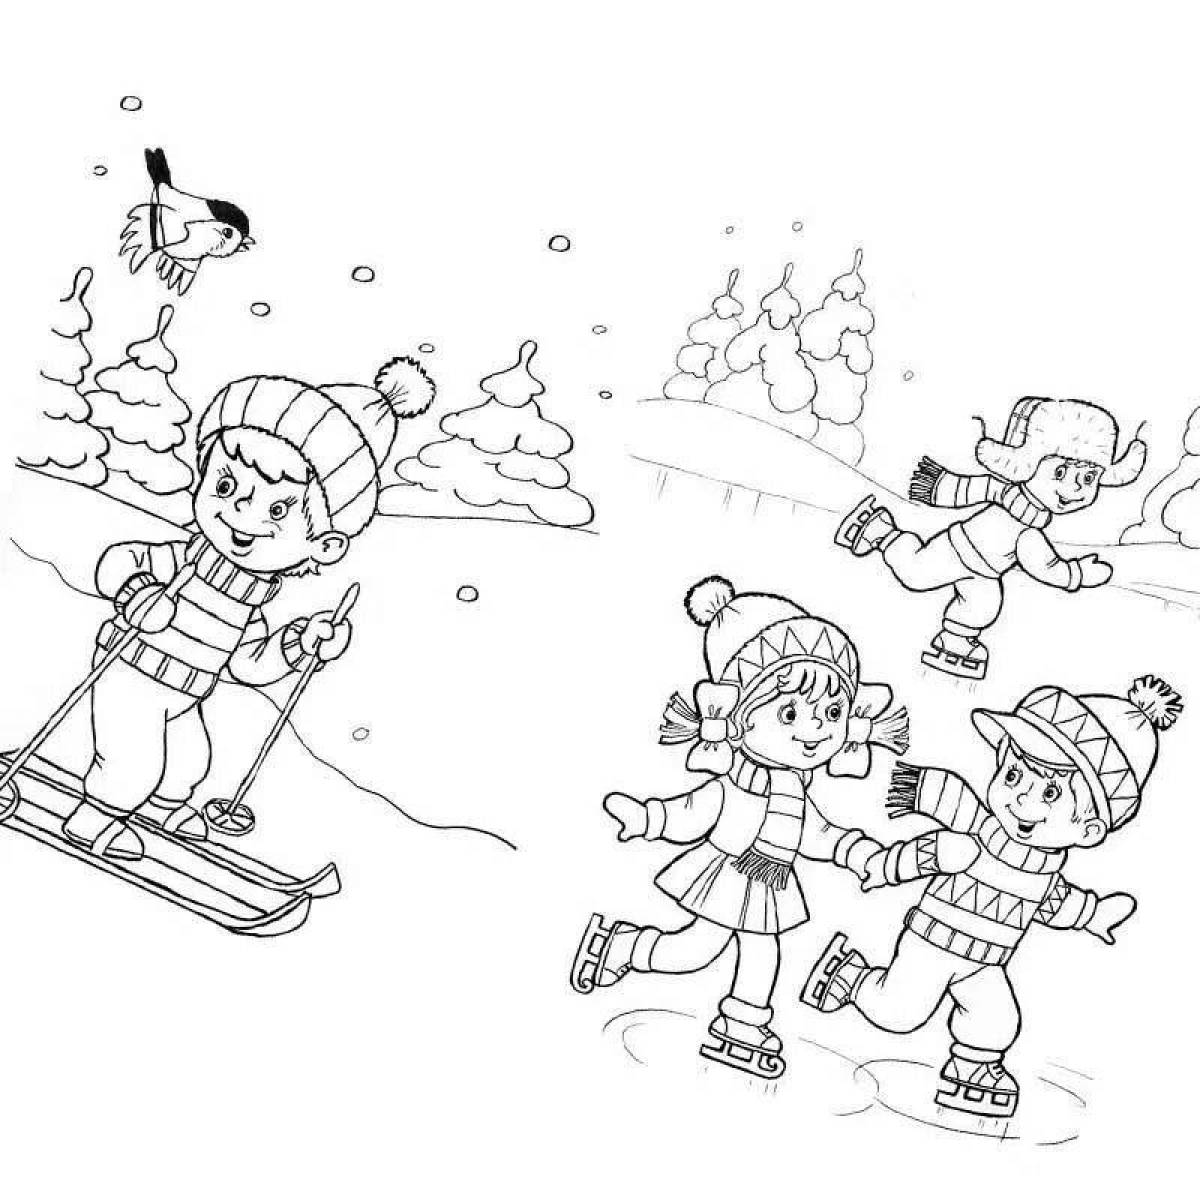 Animated winter sports coloring page for kids